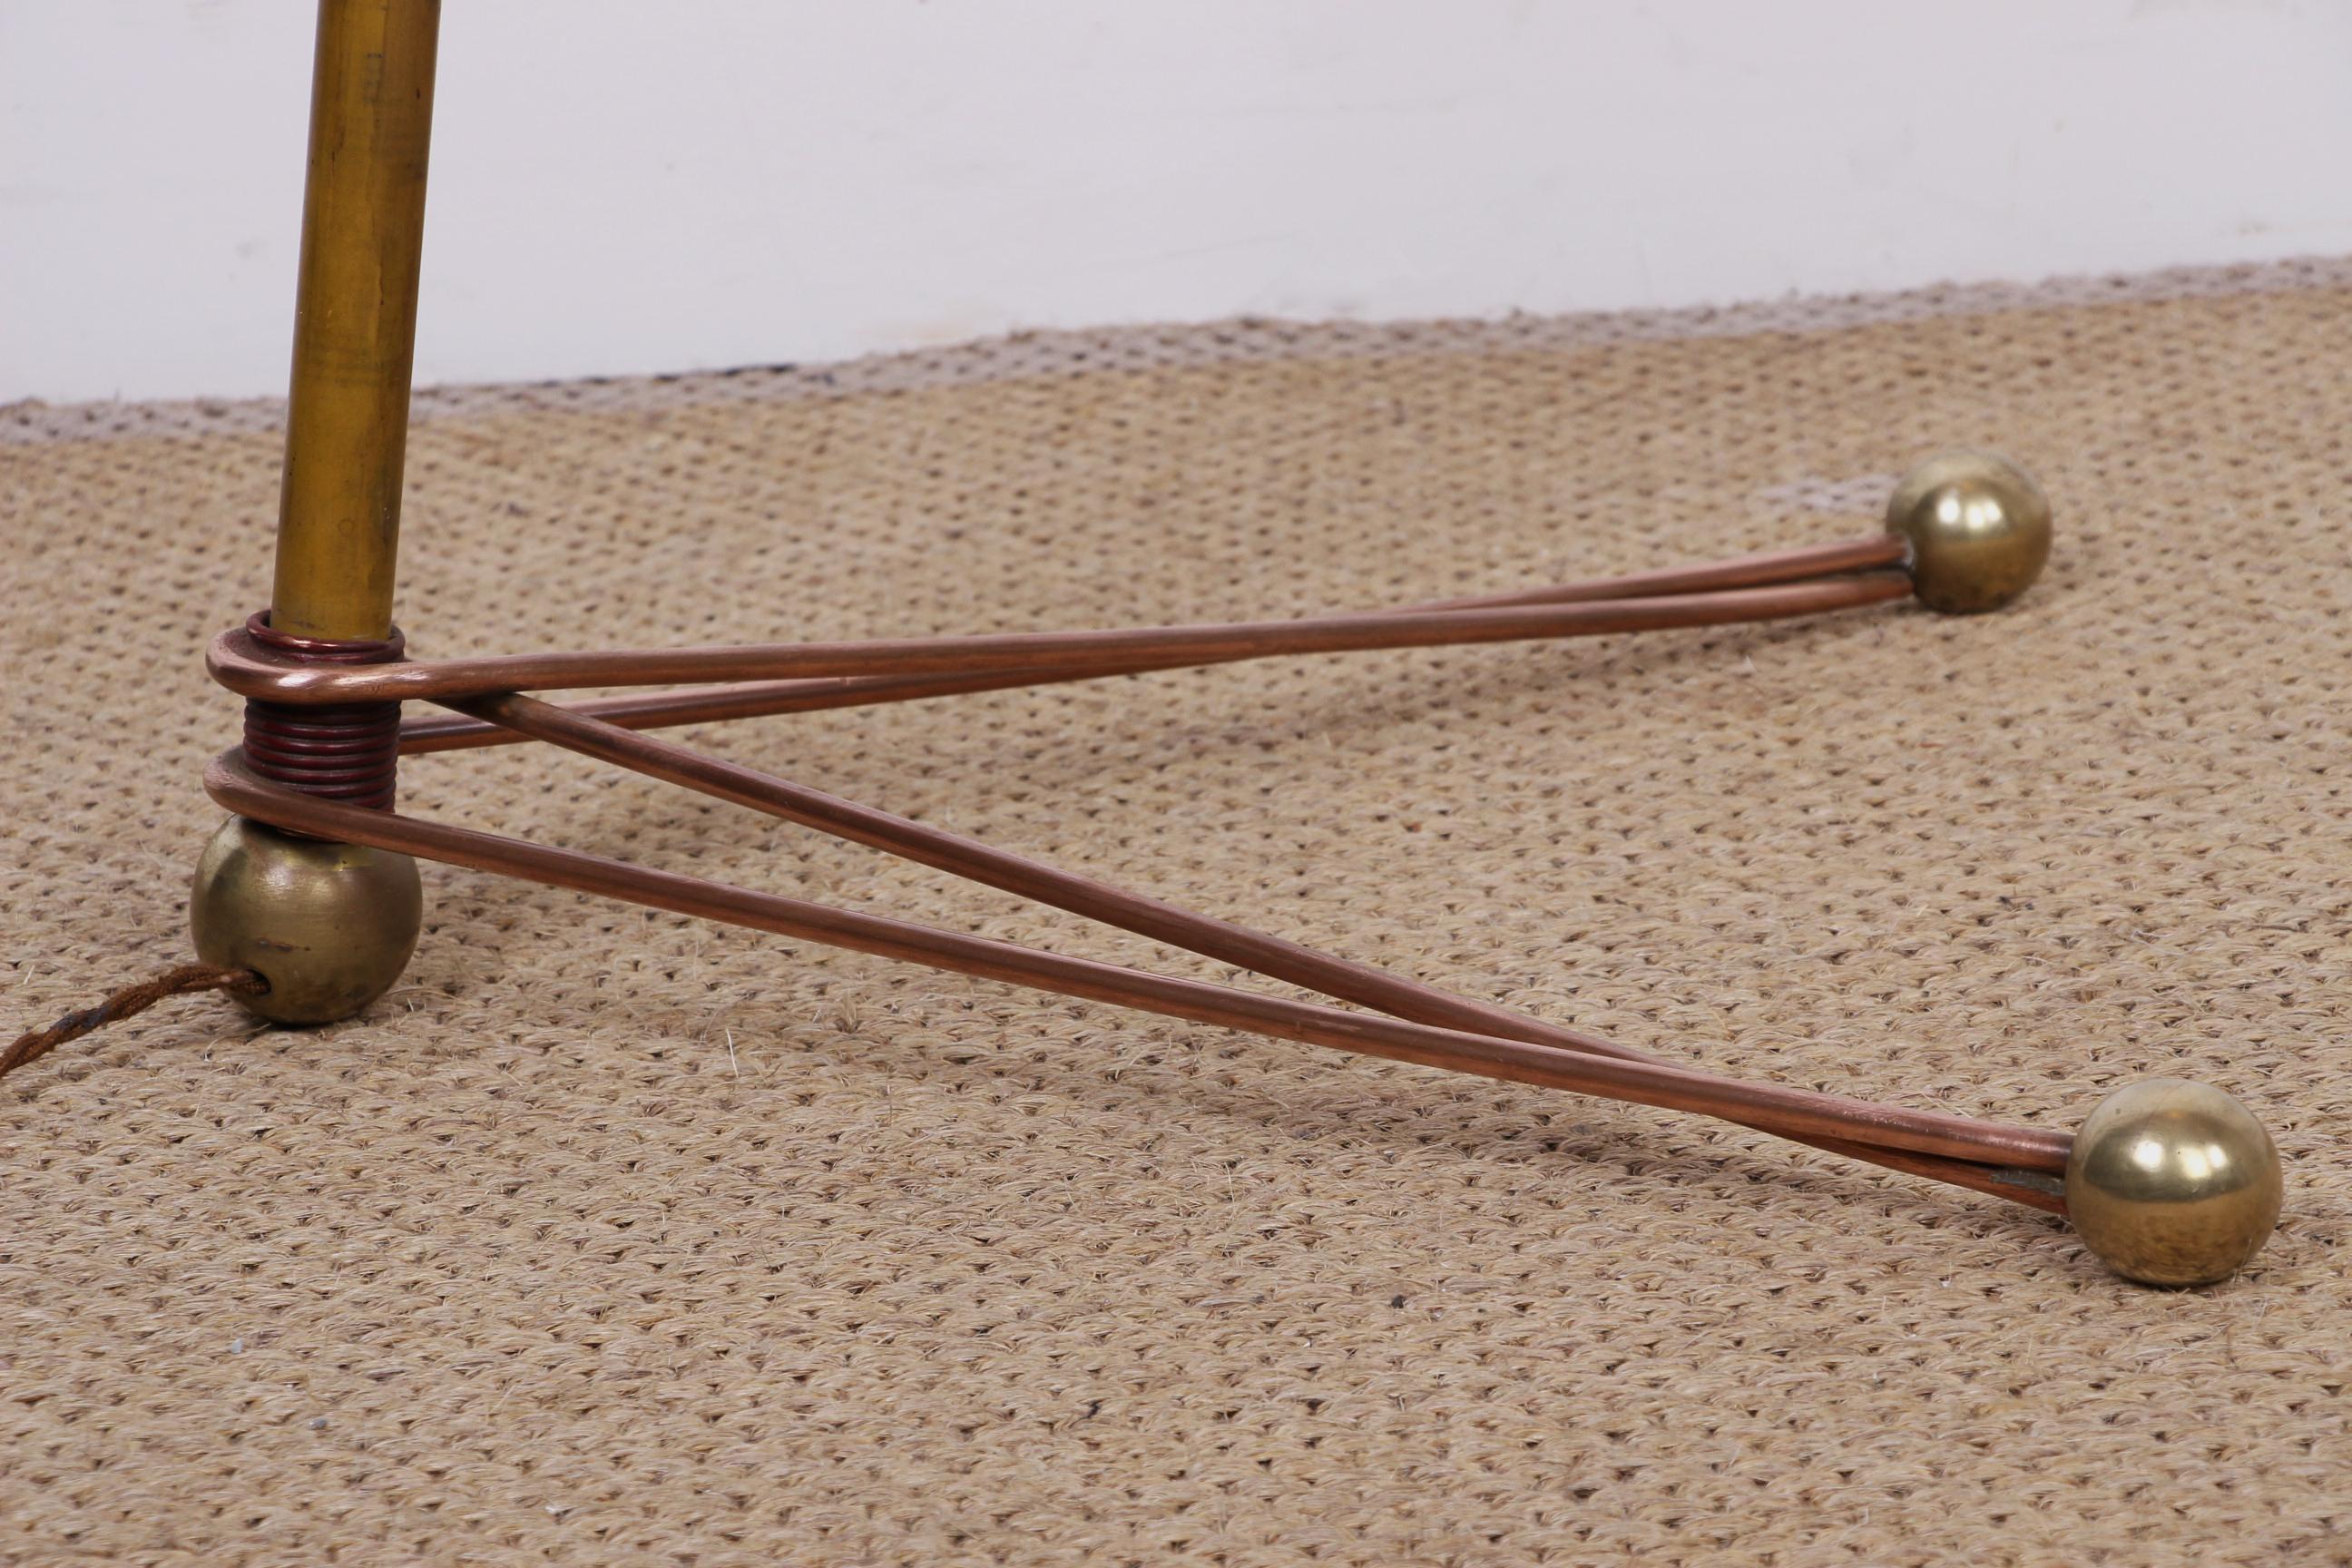 Italian Brass Floor Lamp Was Conical Adjustable in Inclination and Height Stilno 4